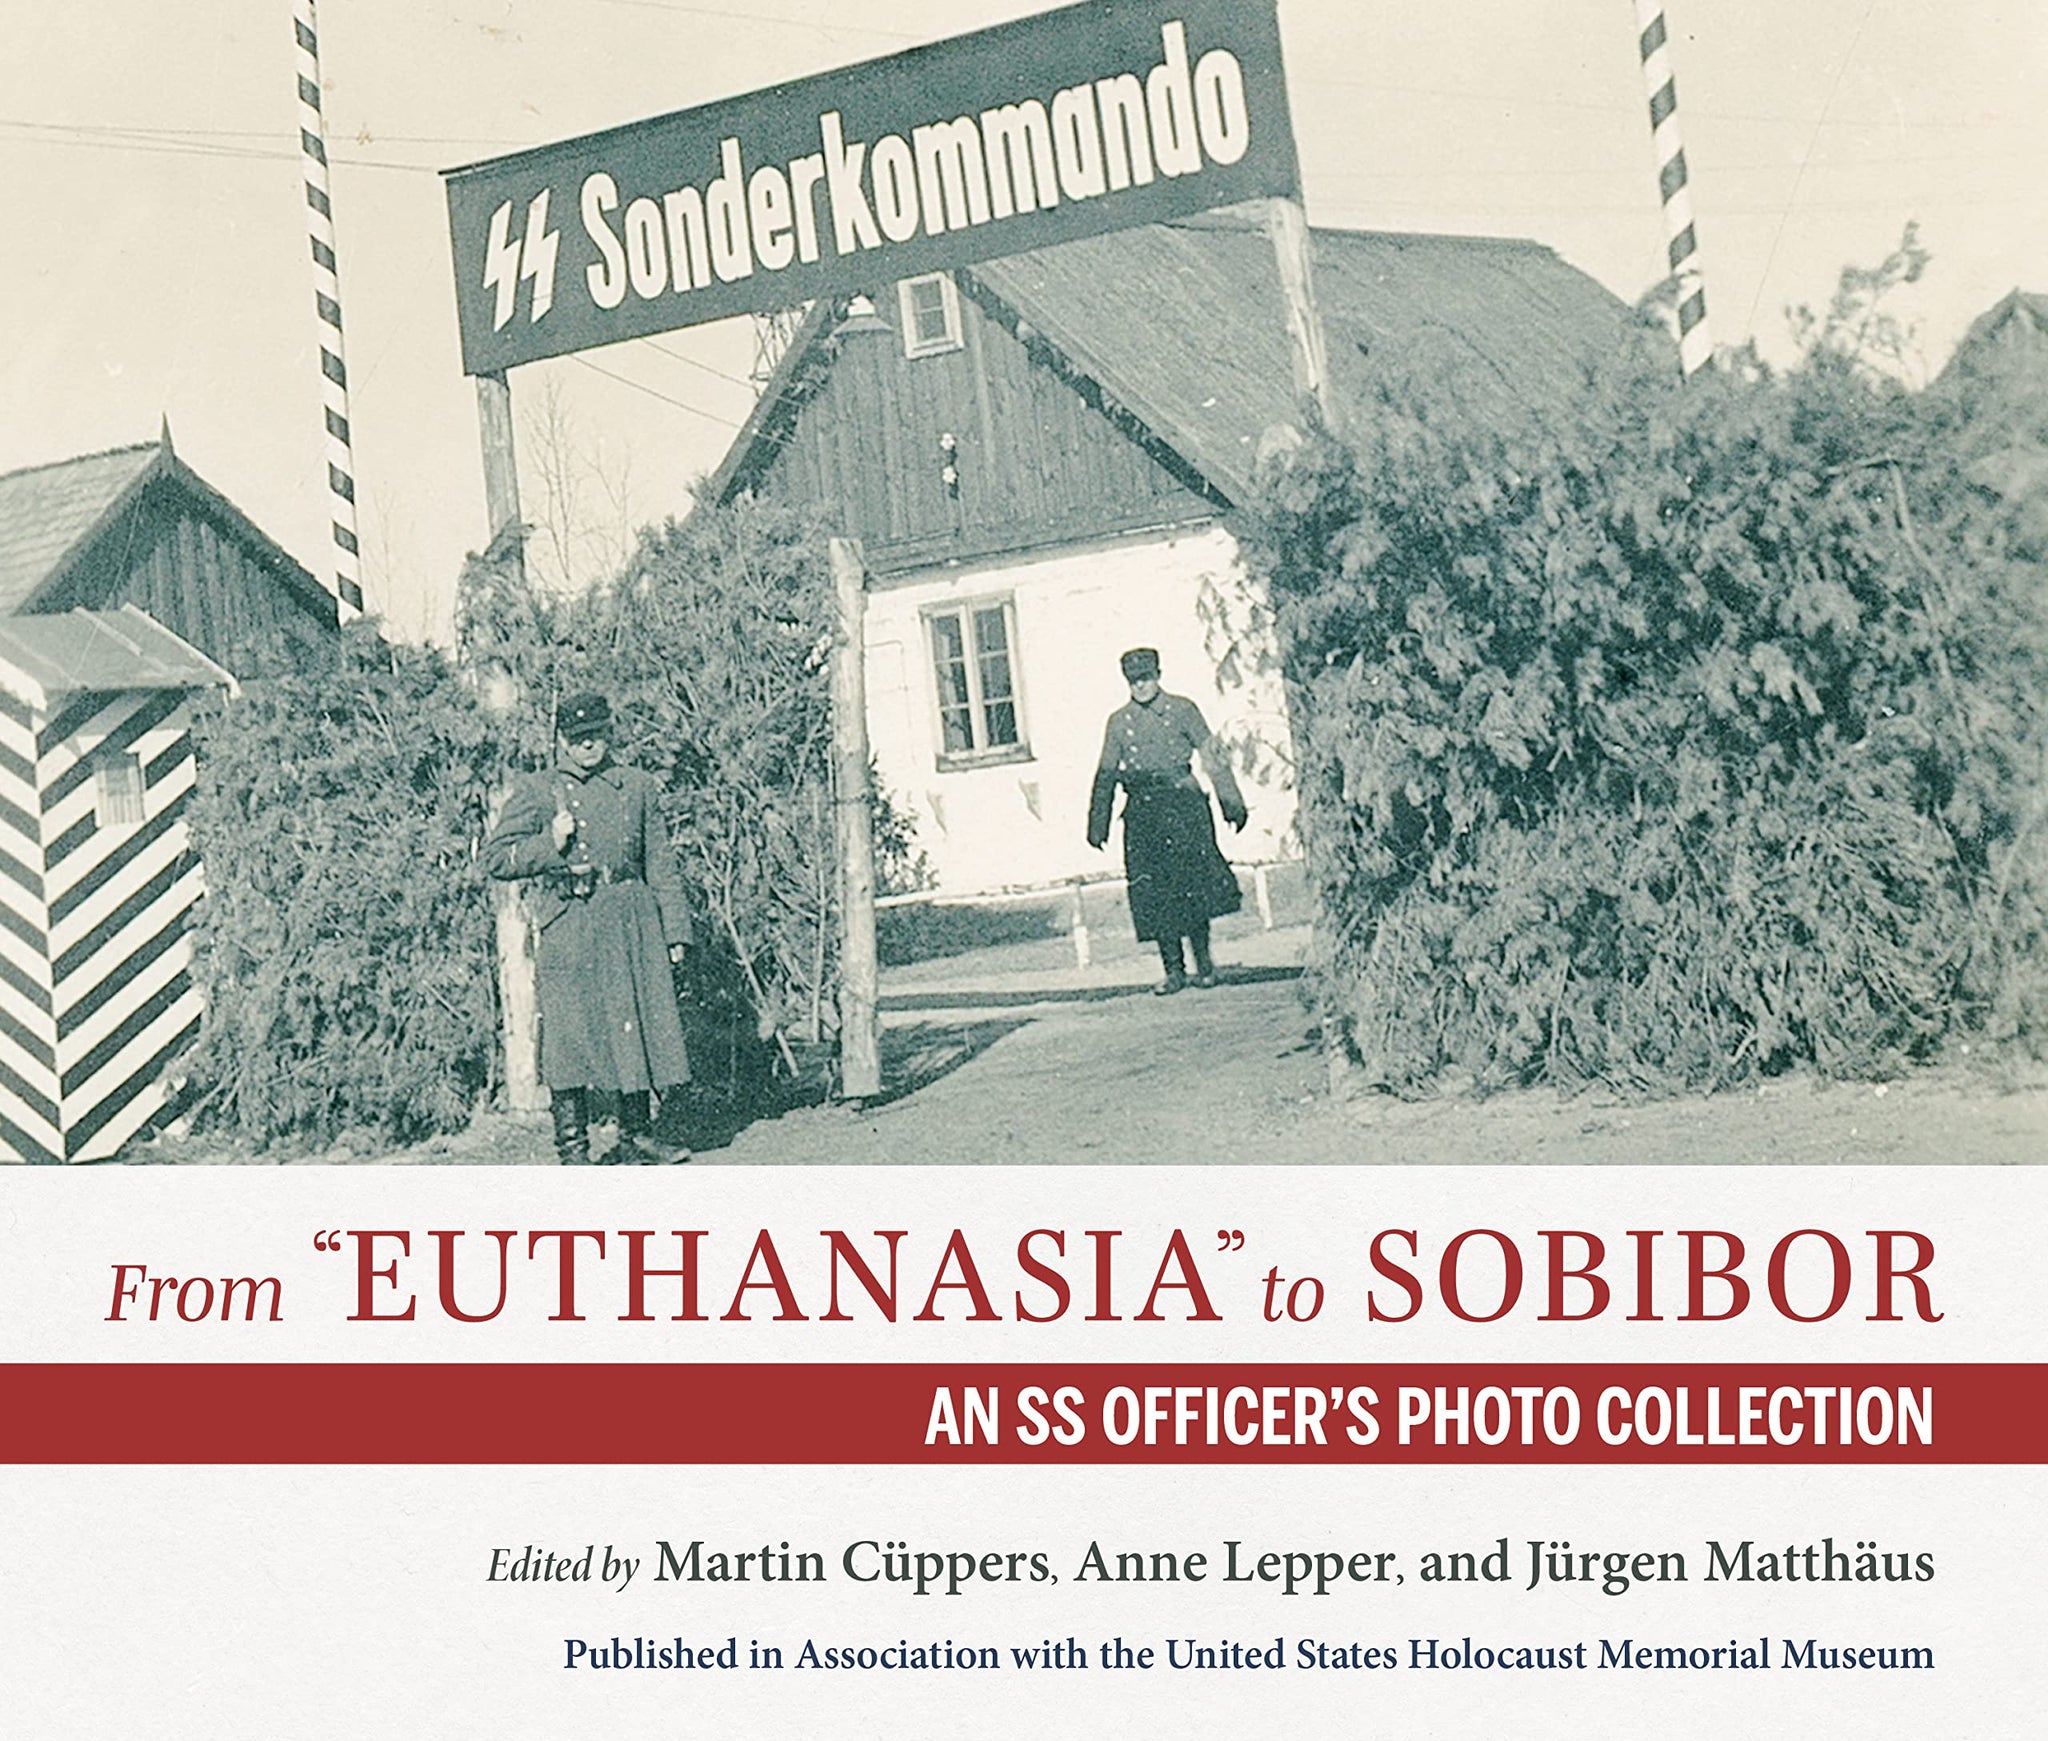 From "Euthanasia" to Sobibor: An SS Officer's Photo Collection